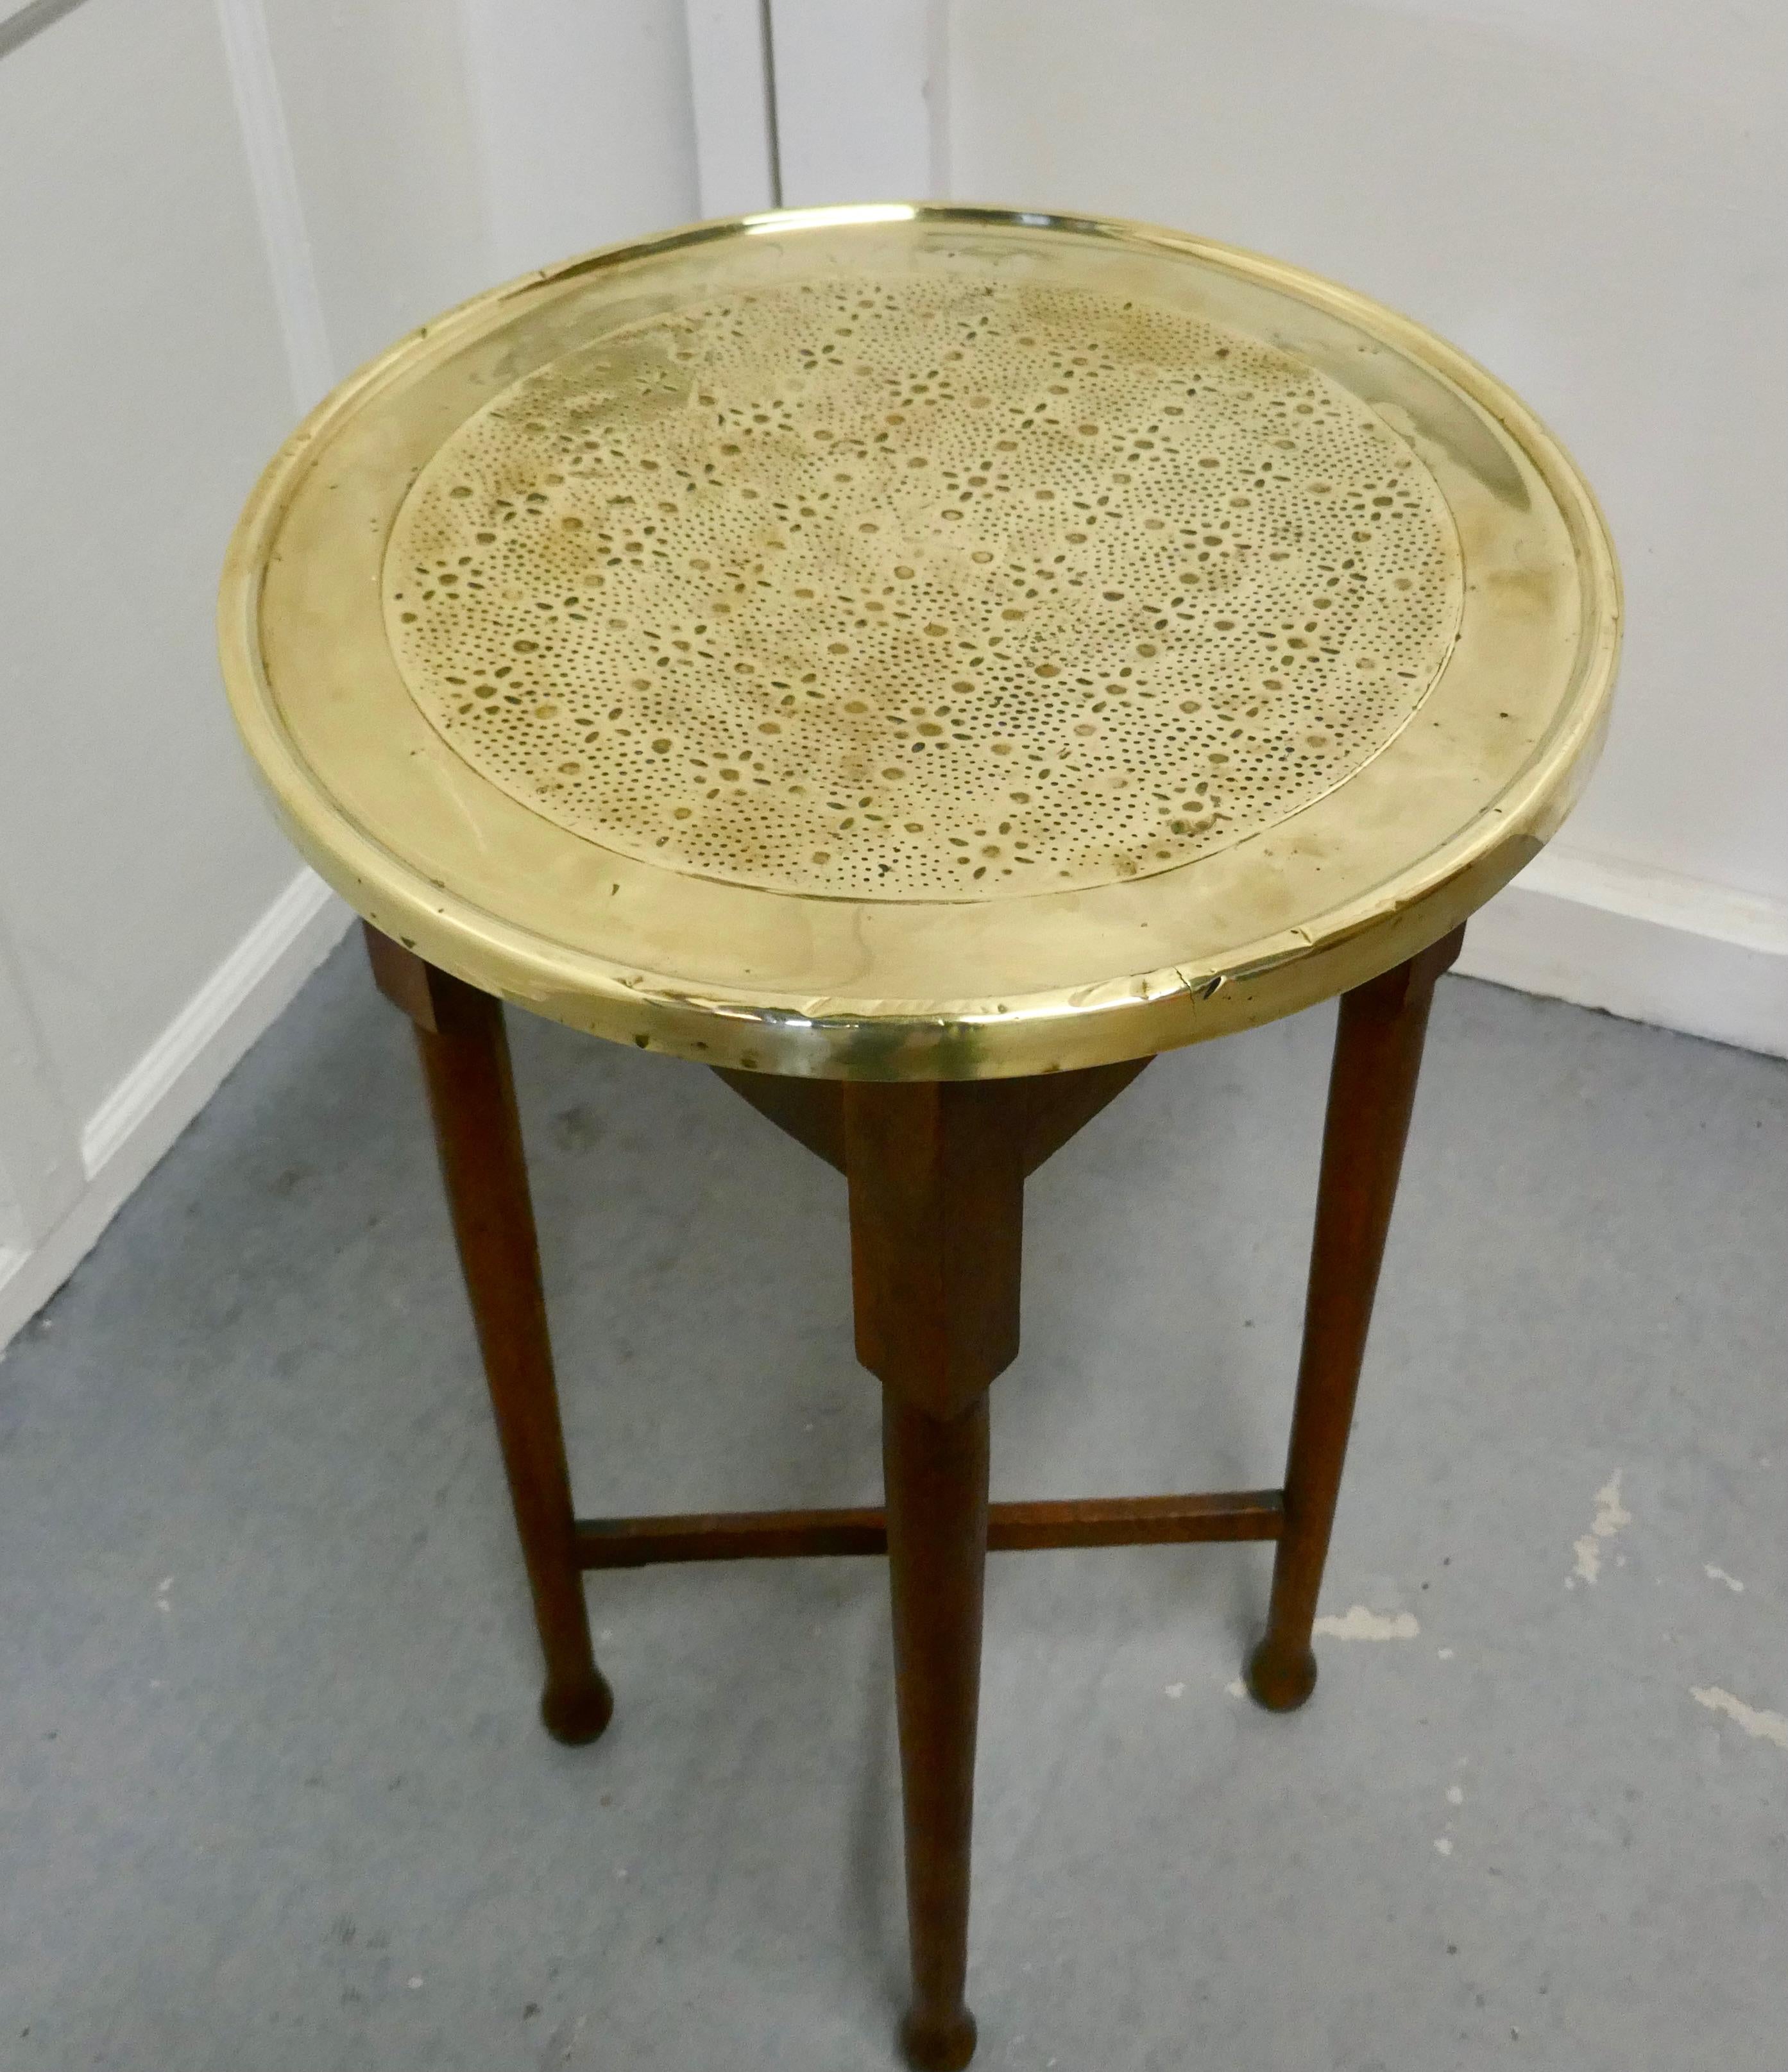 Brass top coffee table or occasional table.

The table stands on sturdy oak legs with an X stretcher and a hammered brass table top.
The 2” thick round table top is beautifully polished 

The table is 29.5” high and 218” in diameter
TGB522.